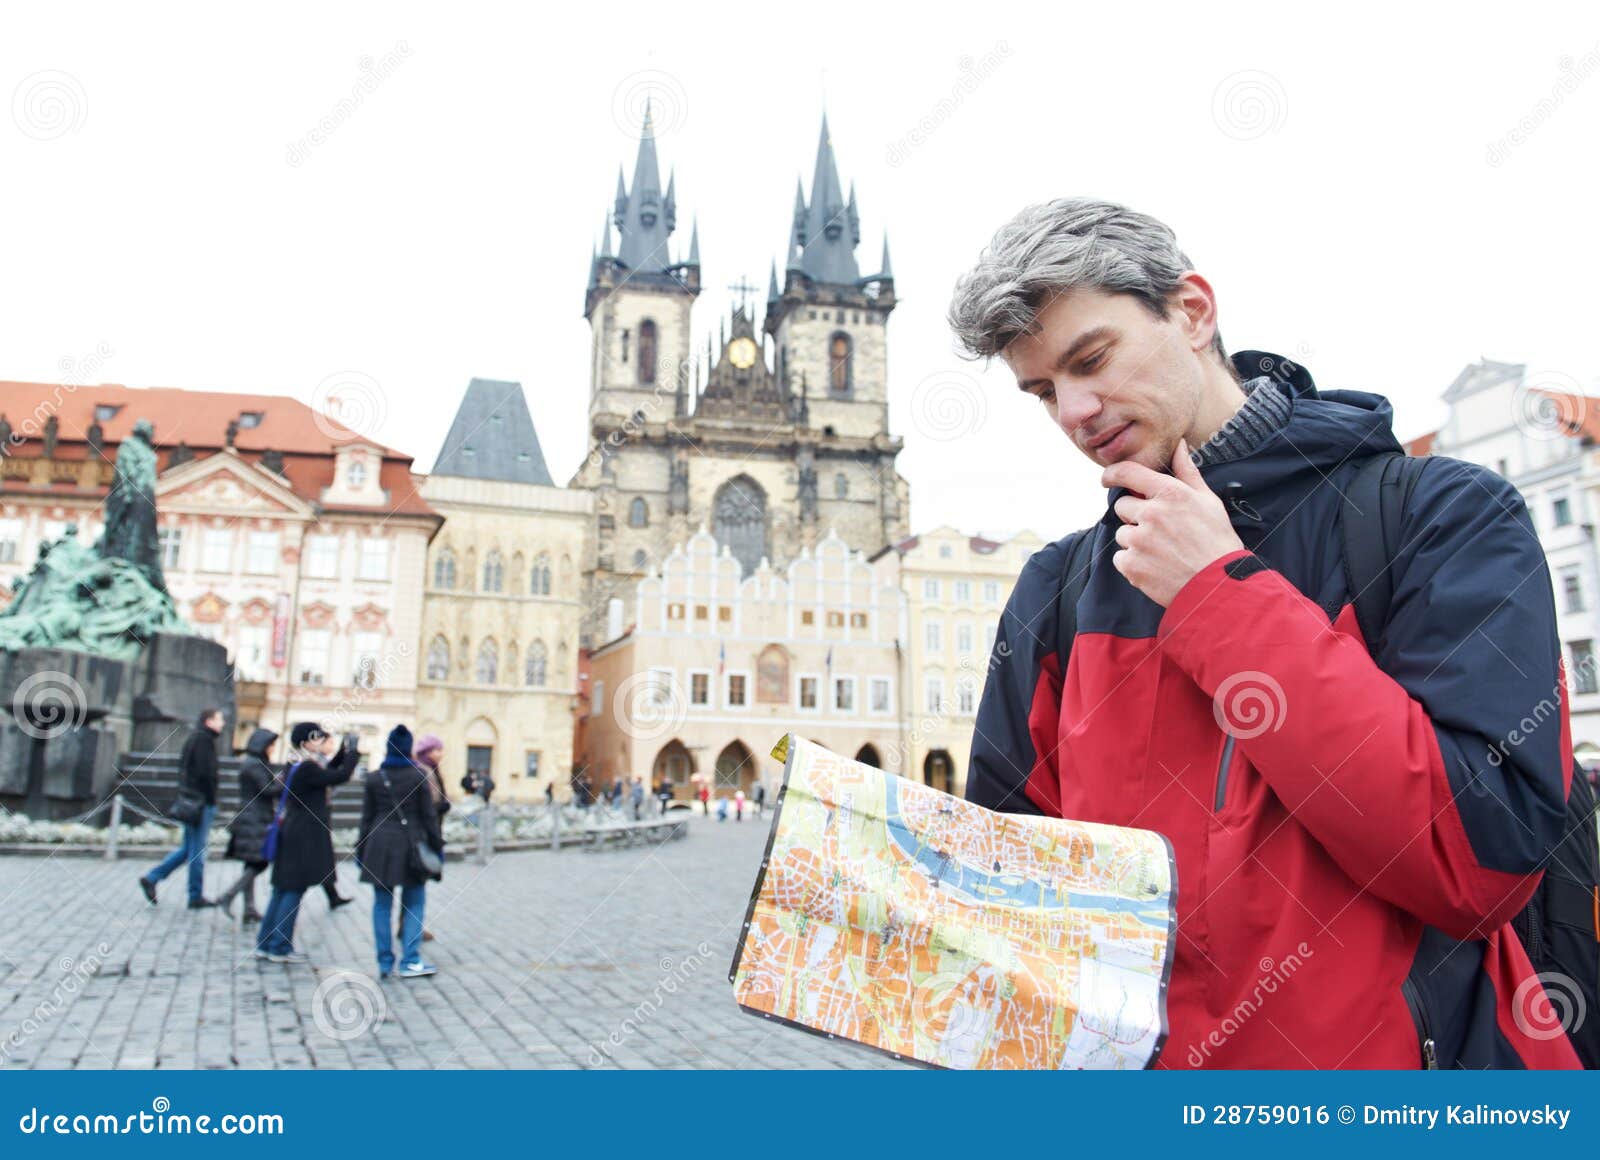 man with map over tourist attraction